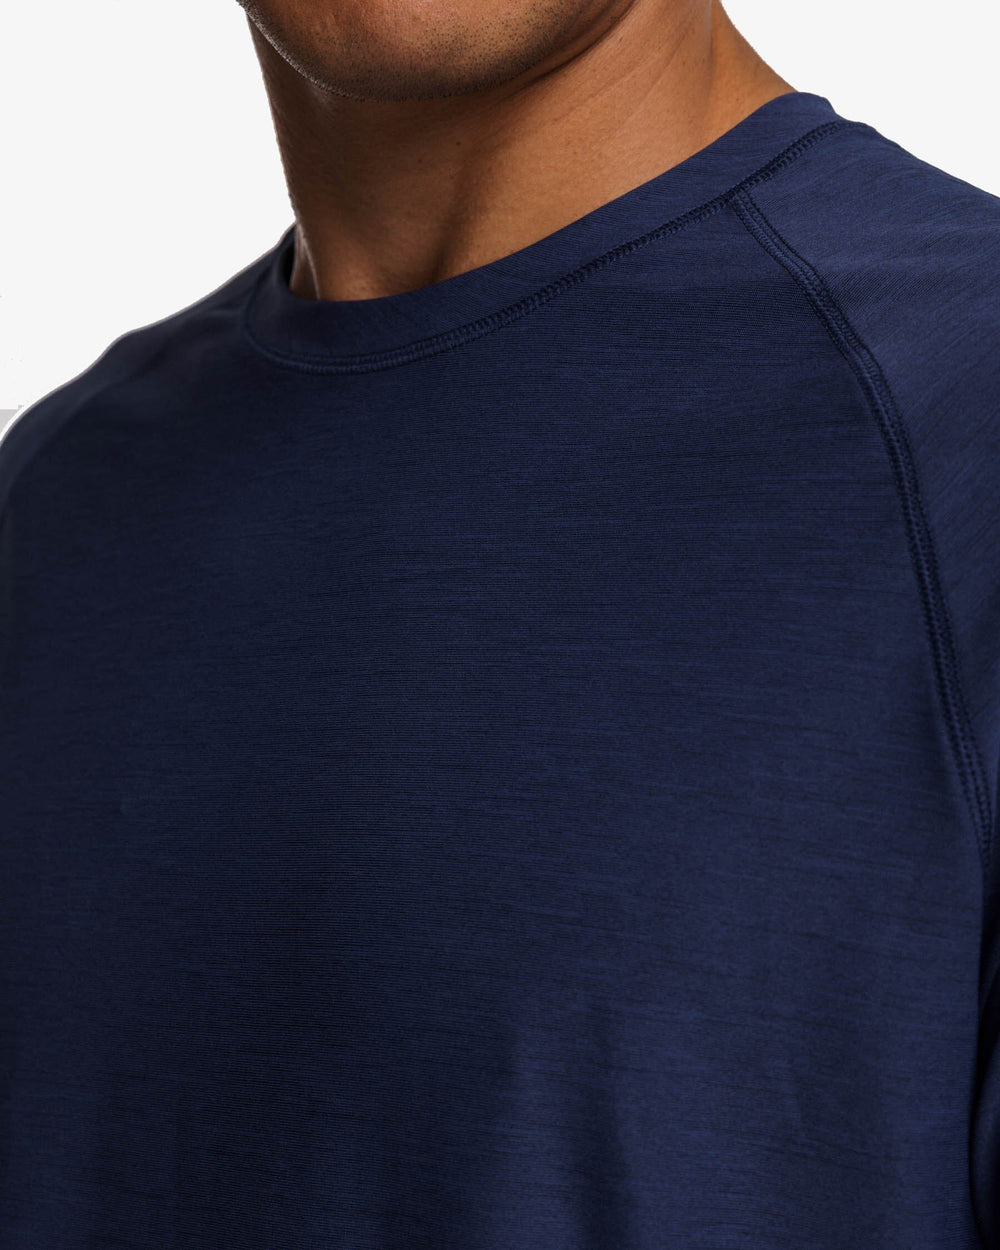 The detail view of the Southern Tide brrr-illiant Performance Long Sleeve Tee by Southern Tide - Nautical Navy